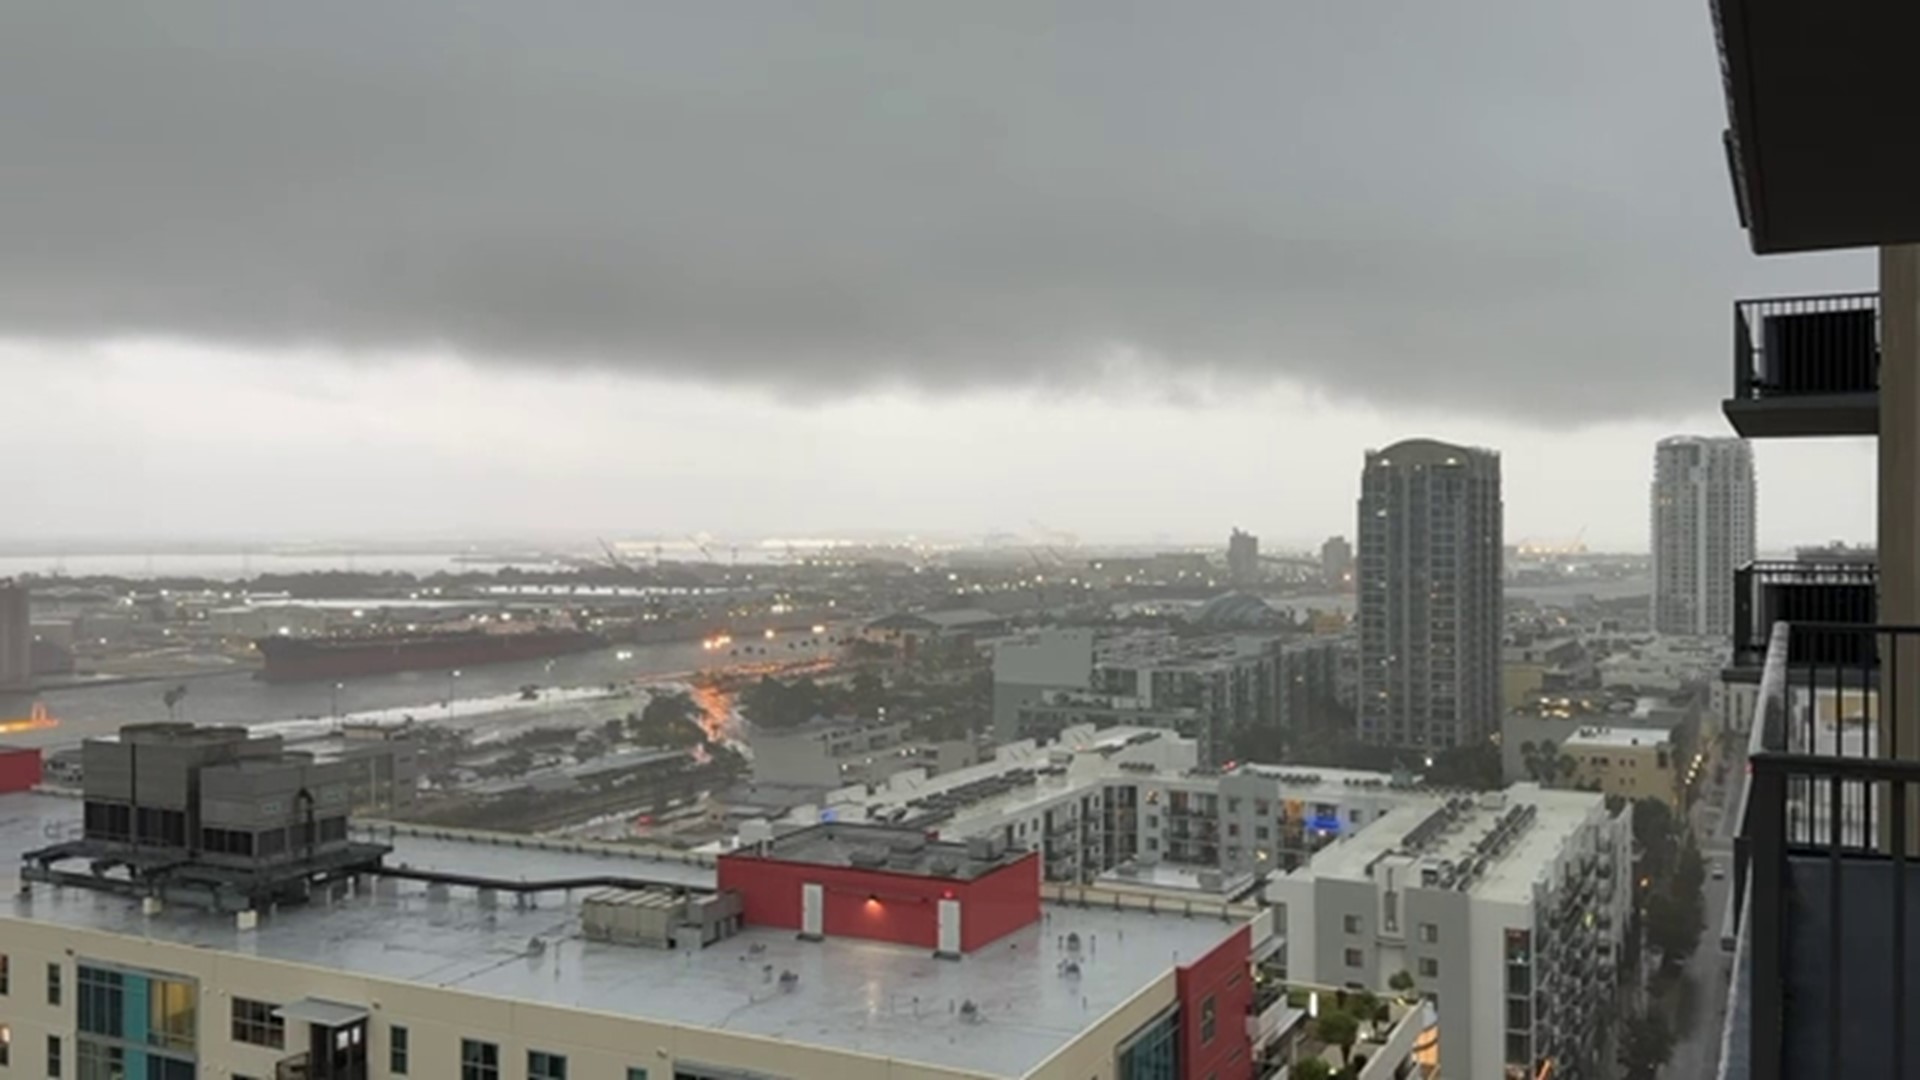 Strong storms seen producing heavy rain and gusty winds move through the downtown Tampa area on Tuesday, Jan. 9.